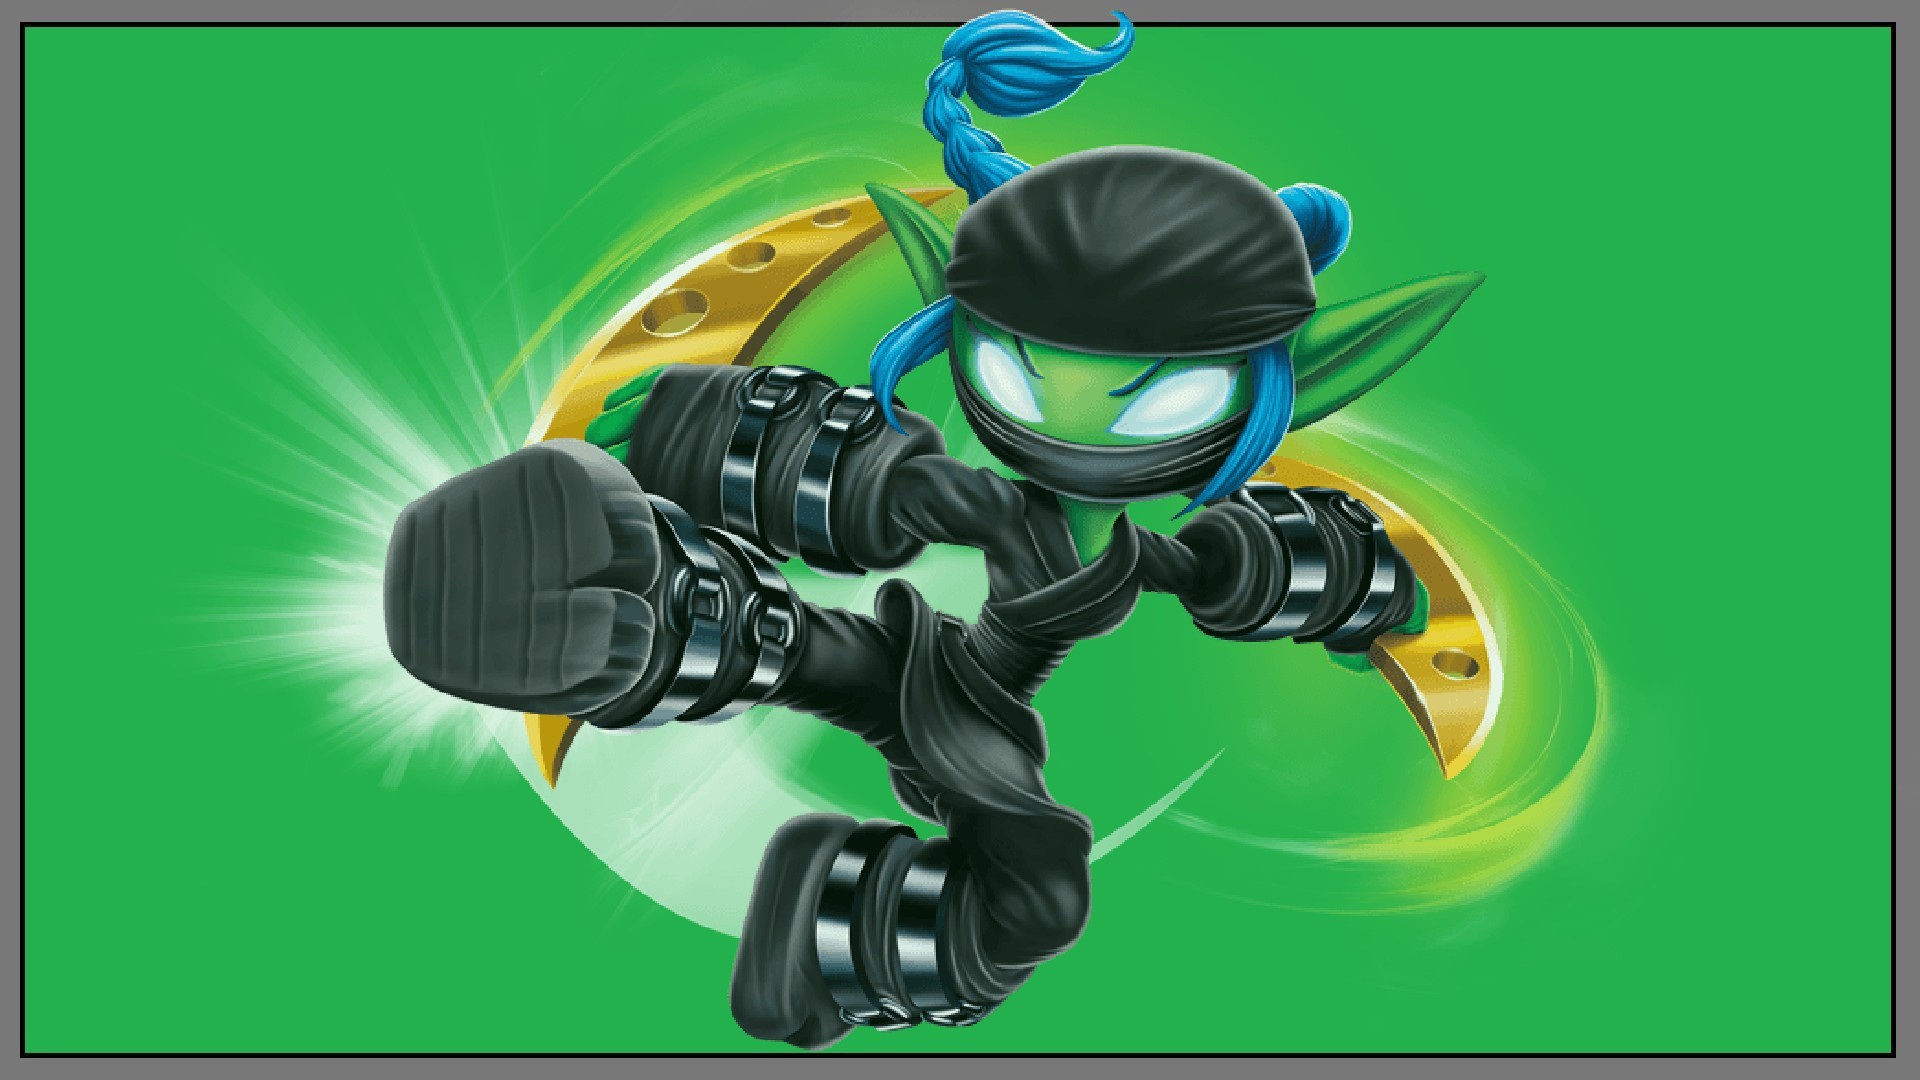 1920x1080 ... Above talking About picture parts of Skylanders Swap Force Images  Skylanderd Sf HD Wallpaper And Background